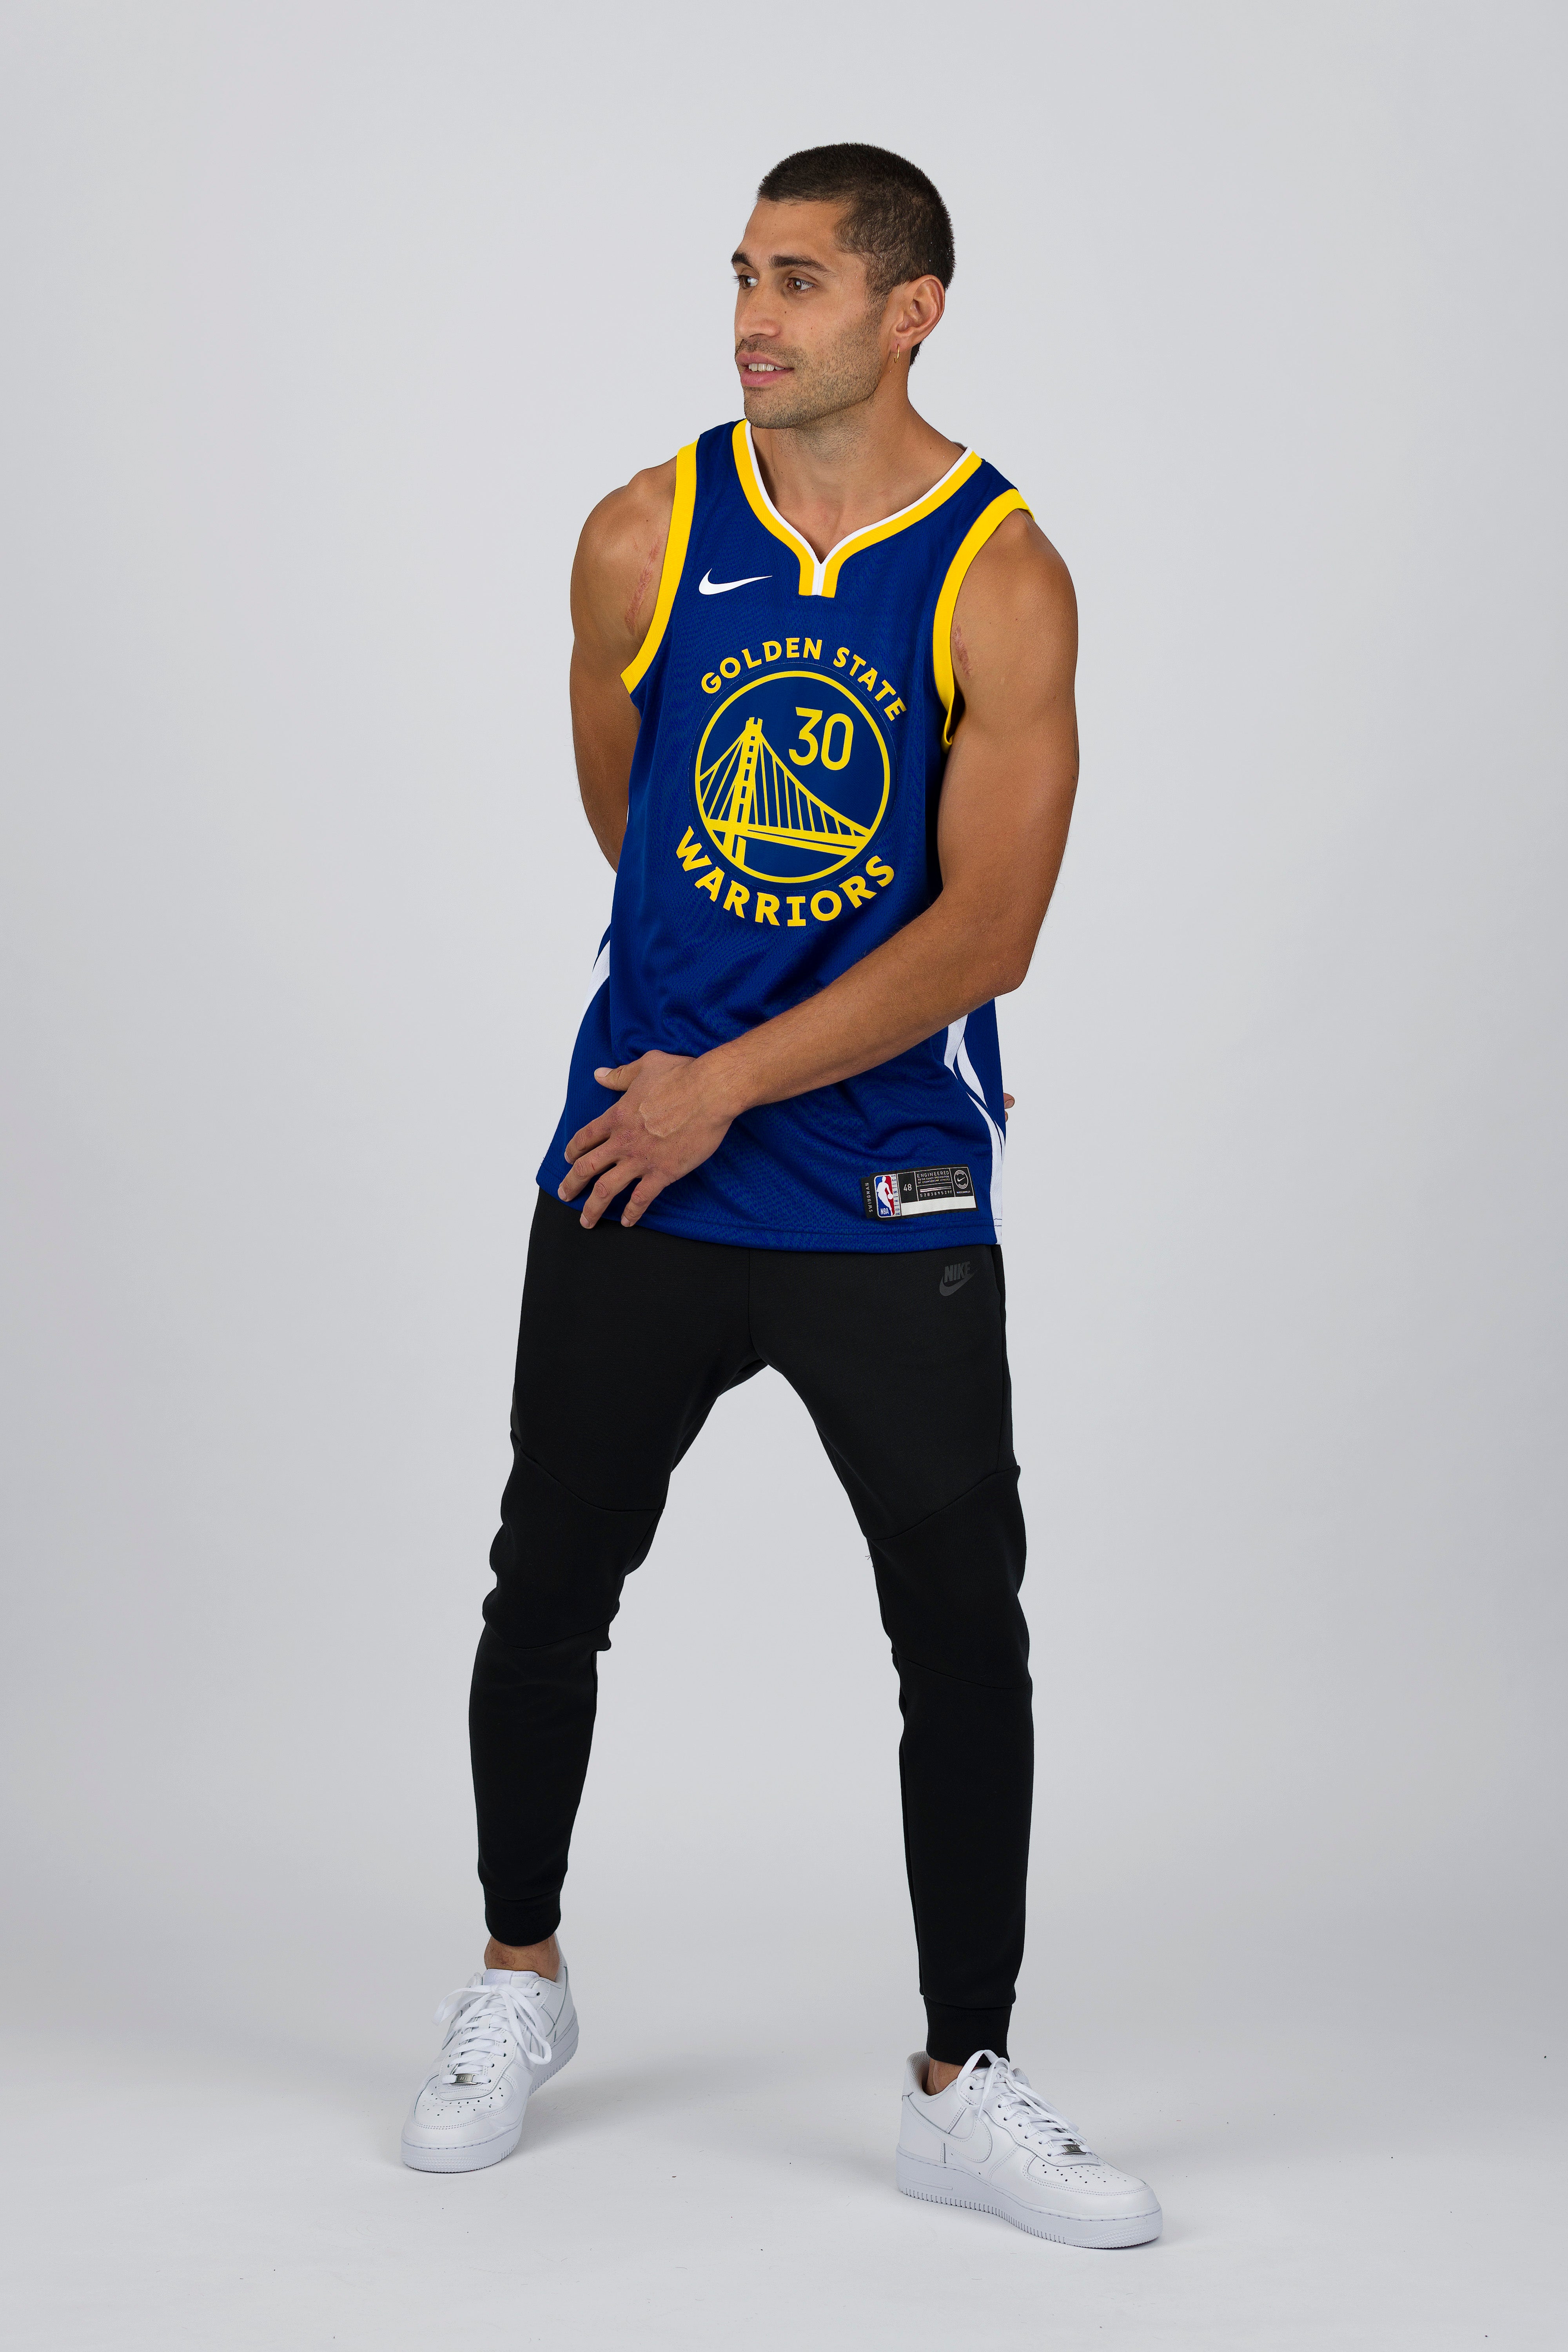 golden state warriors icon jersey